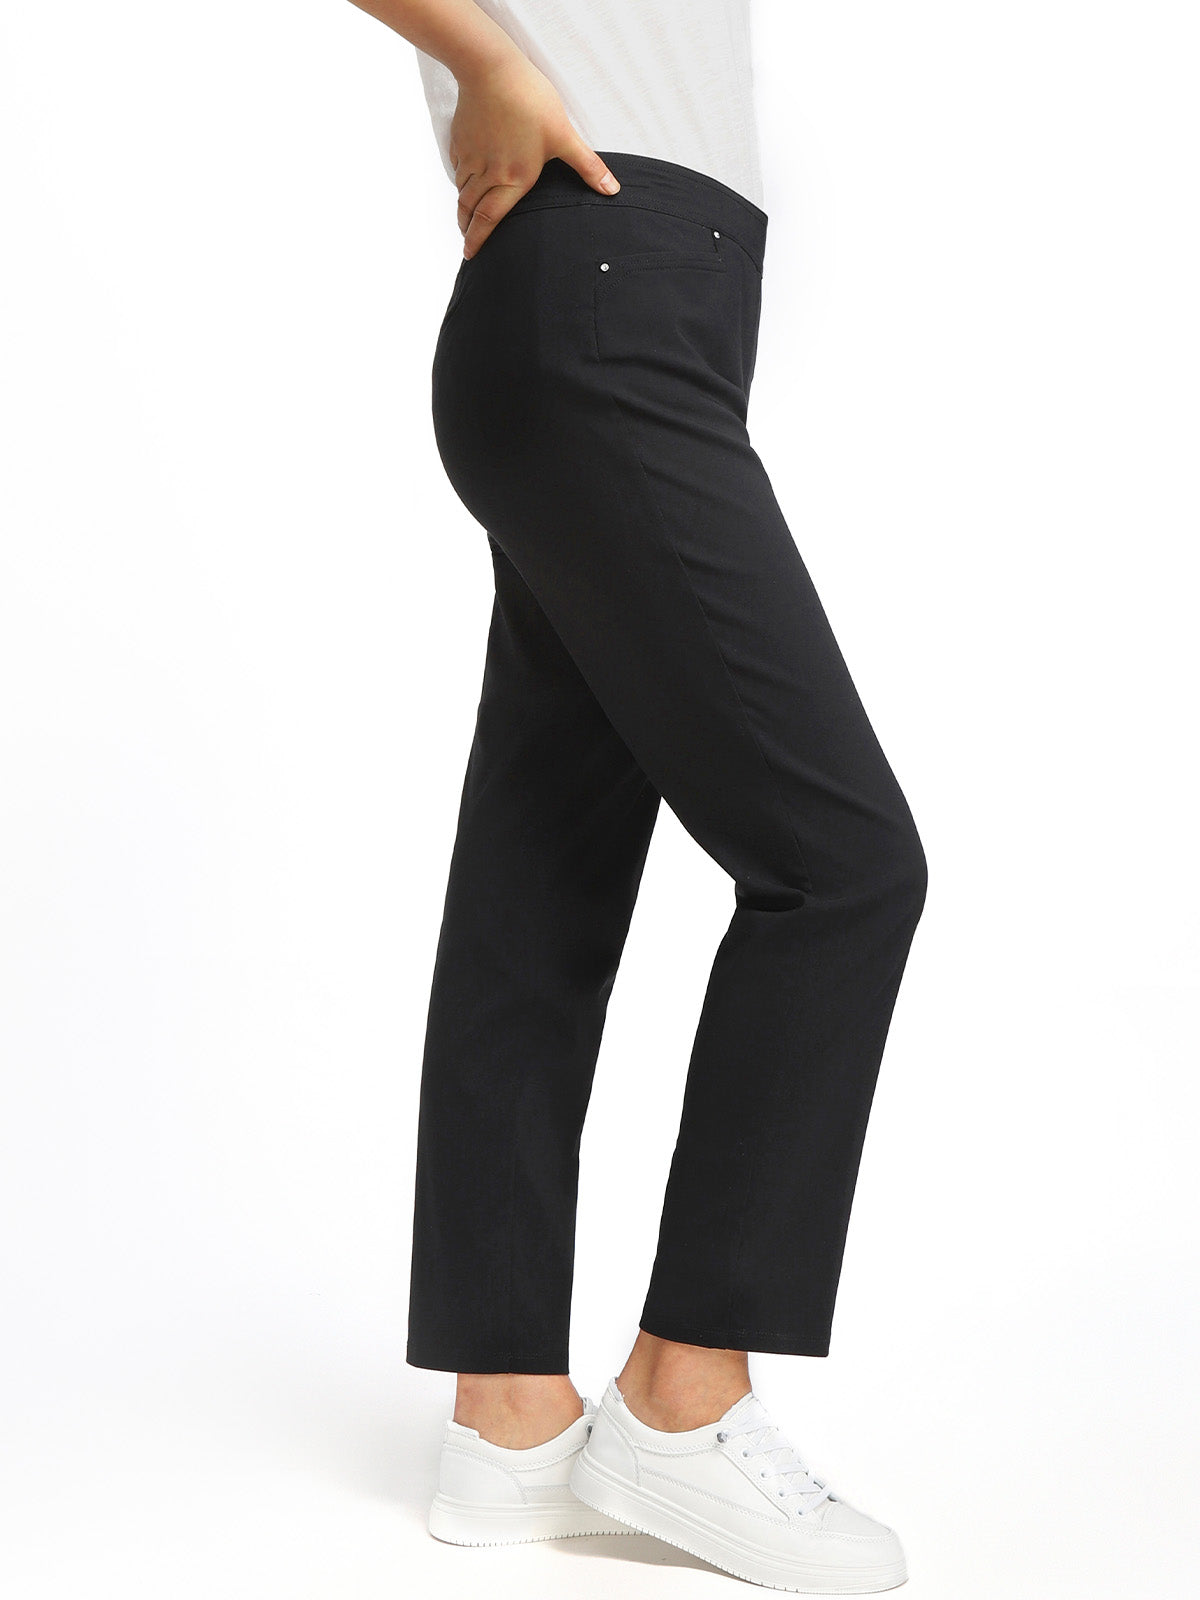 Comfort Waist Millennium Pants with Front Pockets by Retrology